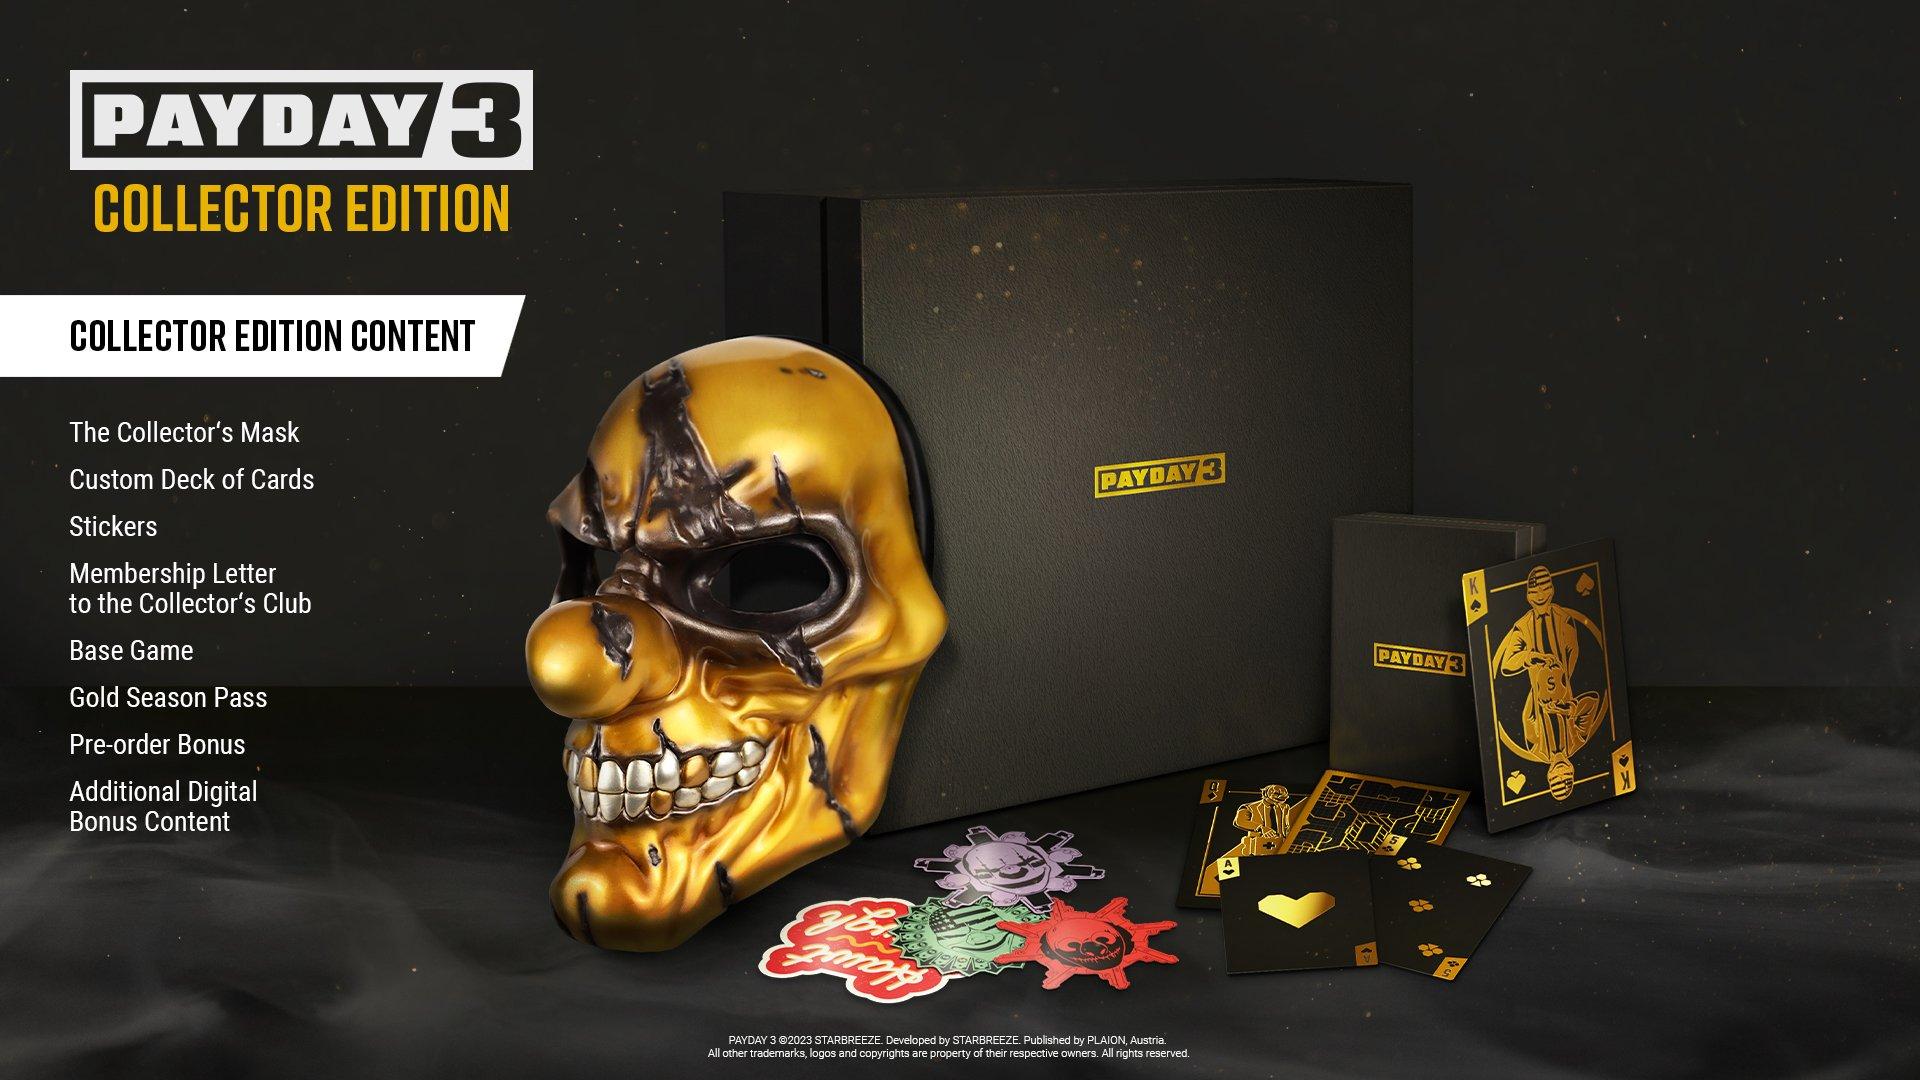 Payday 3 Collector Edition - PS5 - Game Games - Loja de Games Online